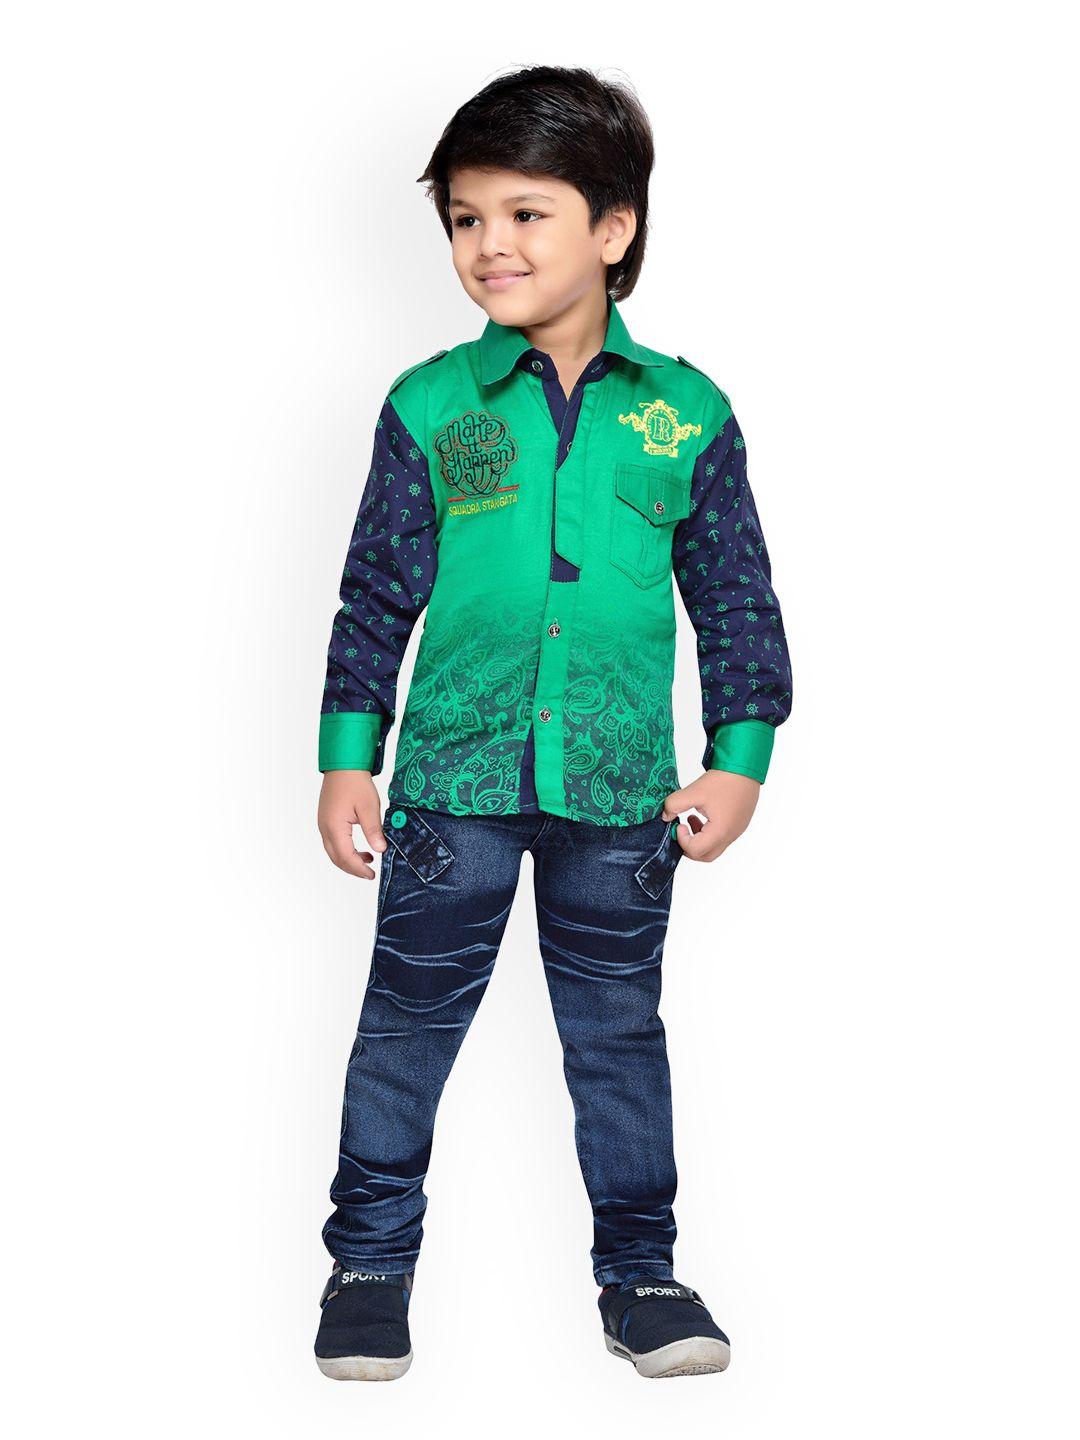 Kidling Boys Green & Blue Printed Shirt with Jeans